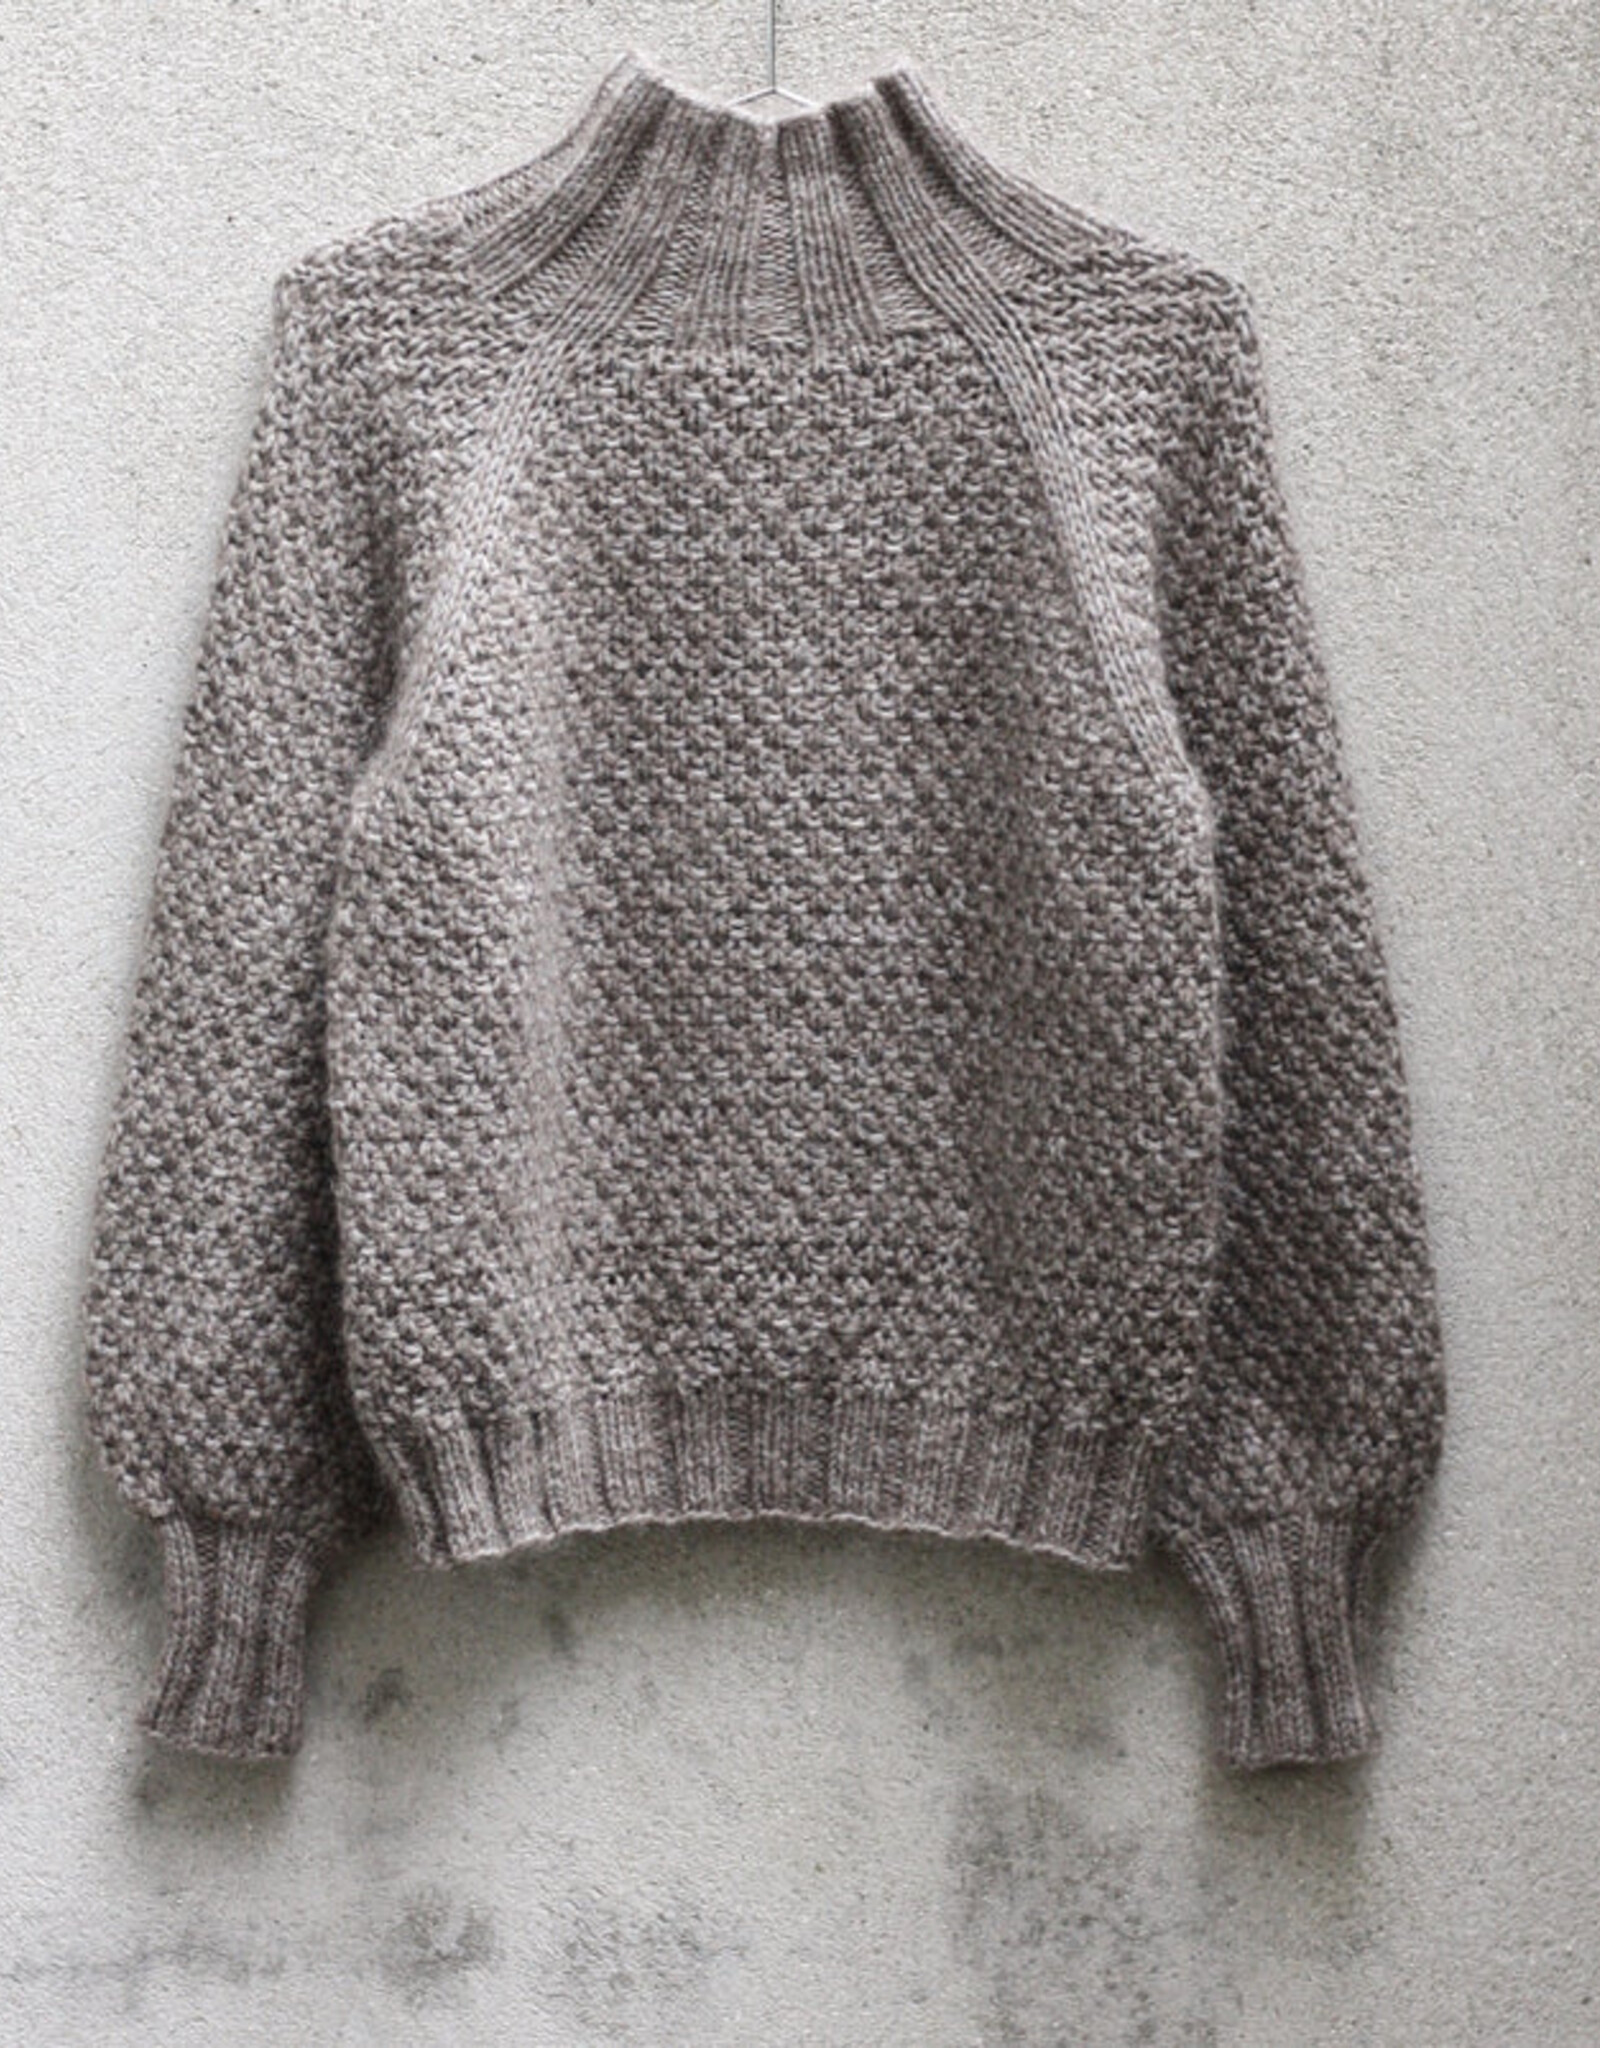 Contemporary Knitting Patterns